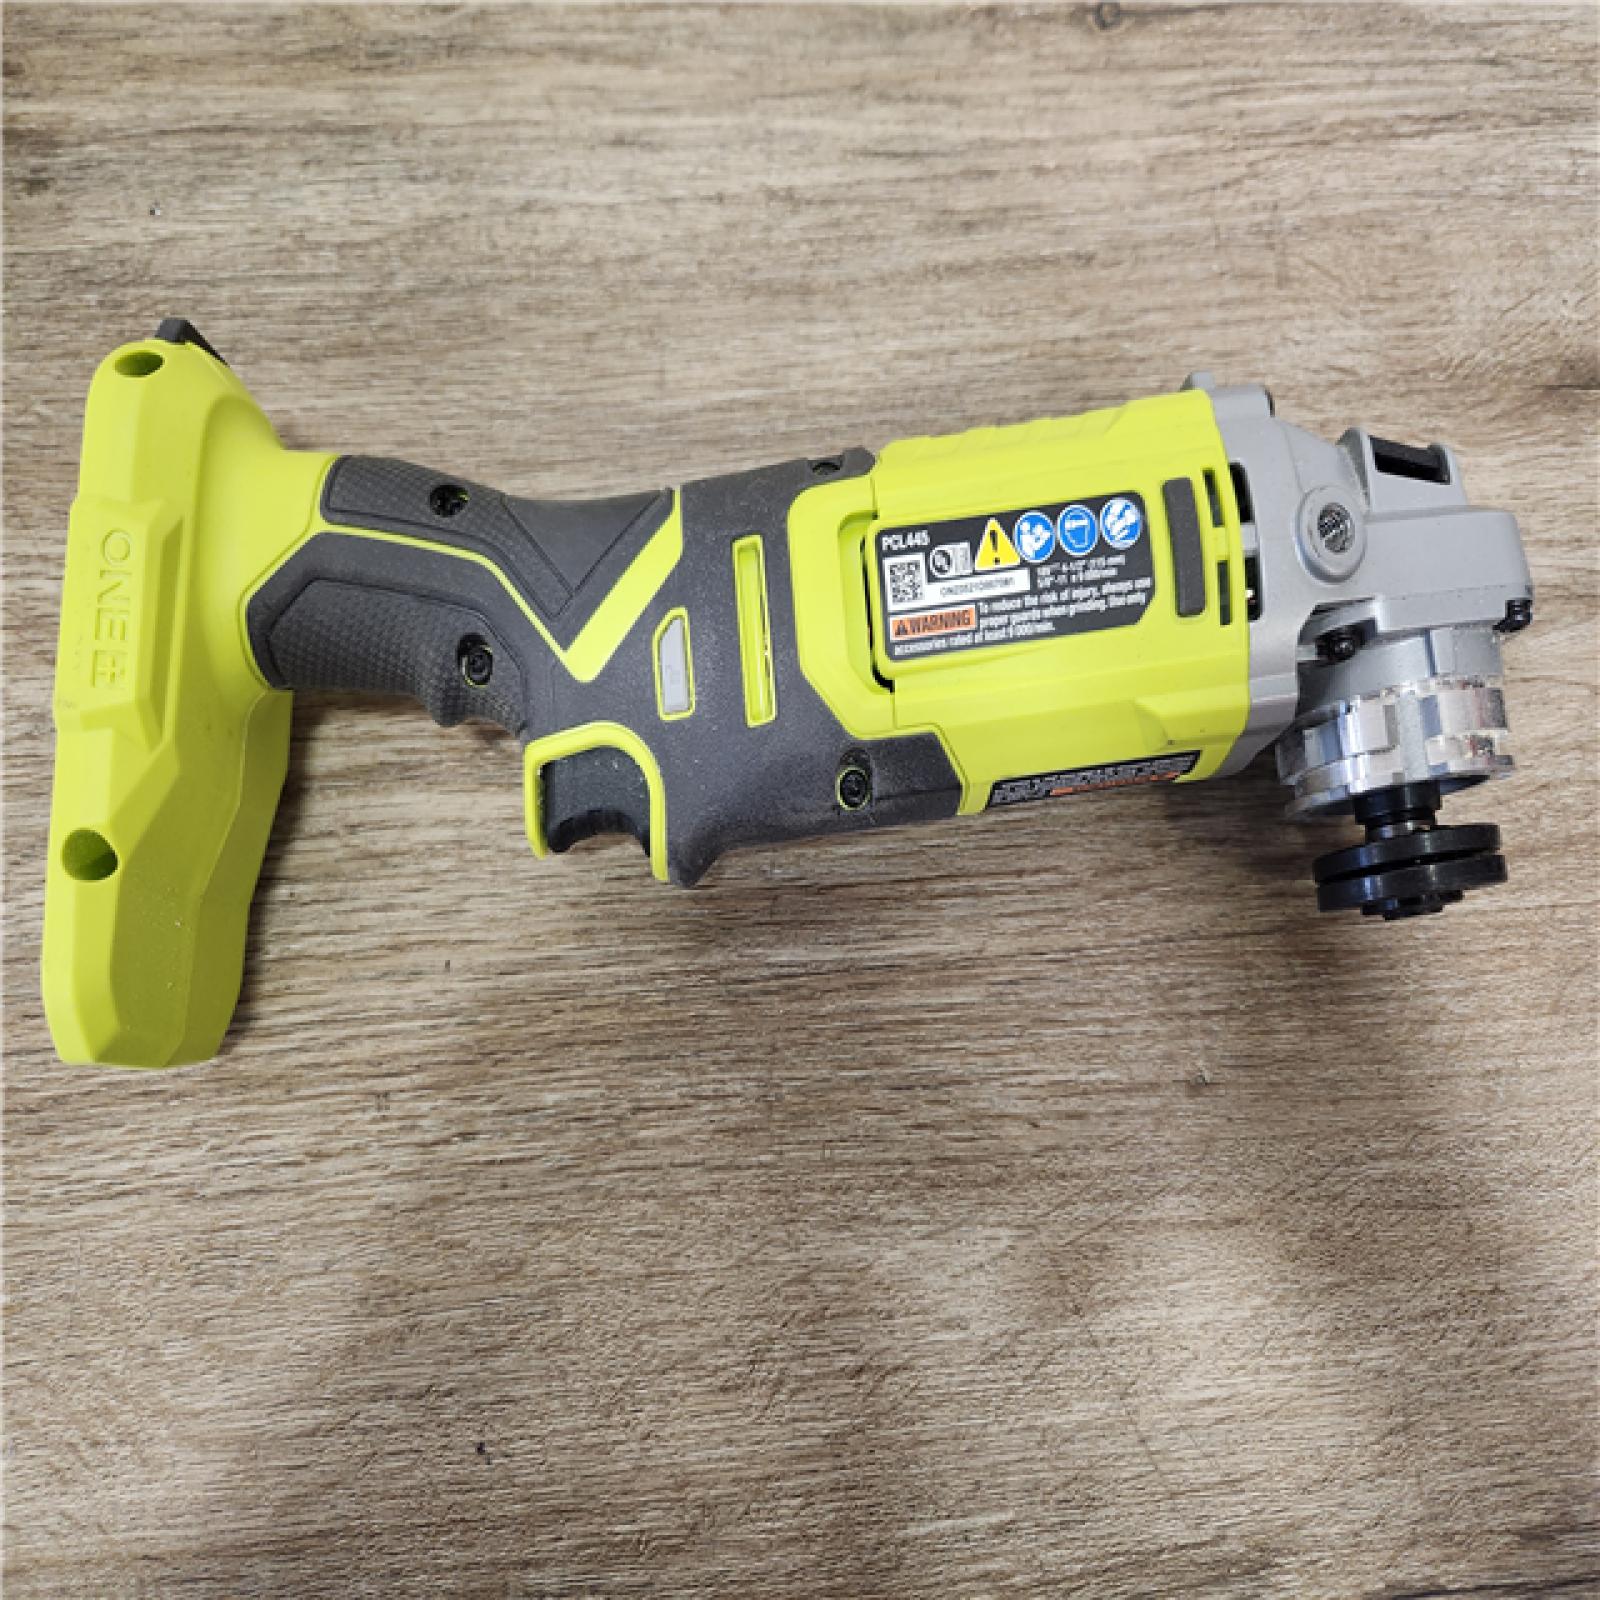 Phoenix Location NEW RYOBI ONE+ 18V Cordless 4-1/2 in. Angle Grinder (Tool Only)